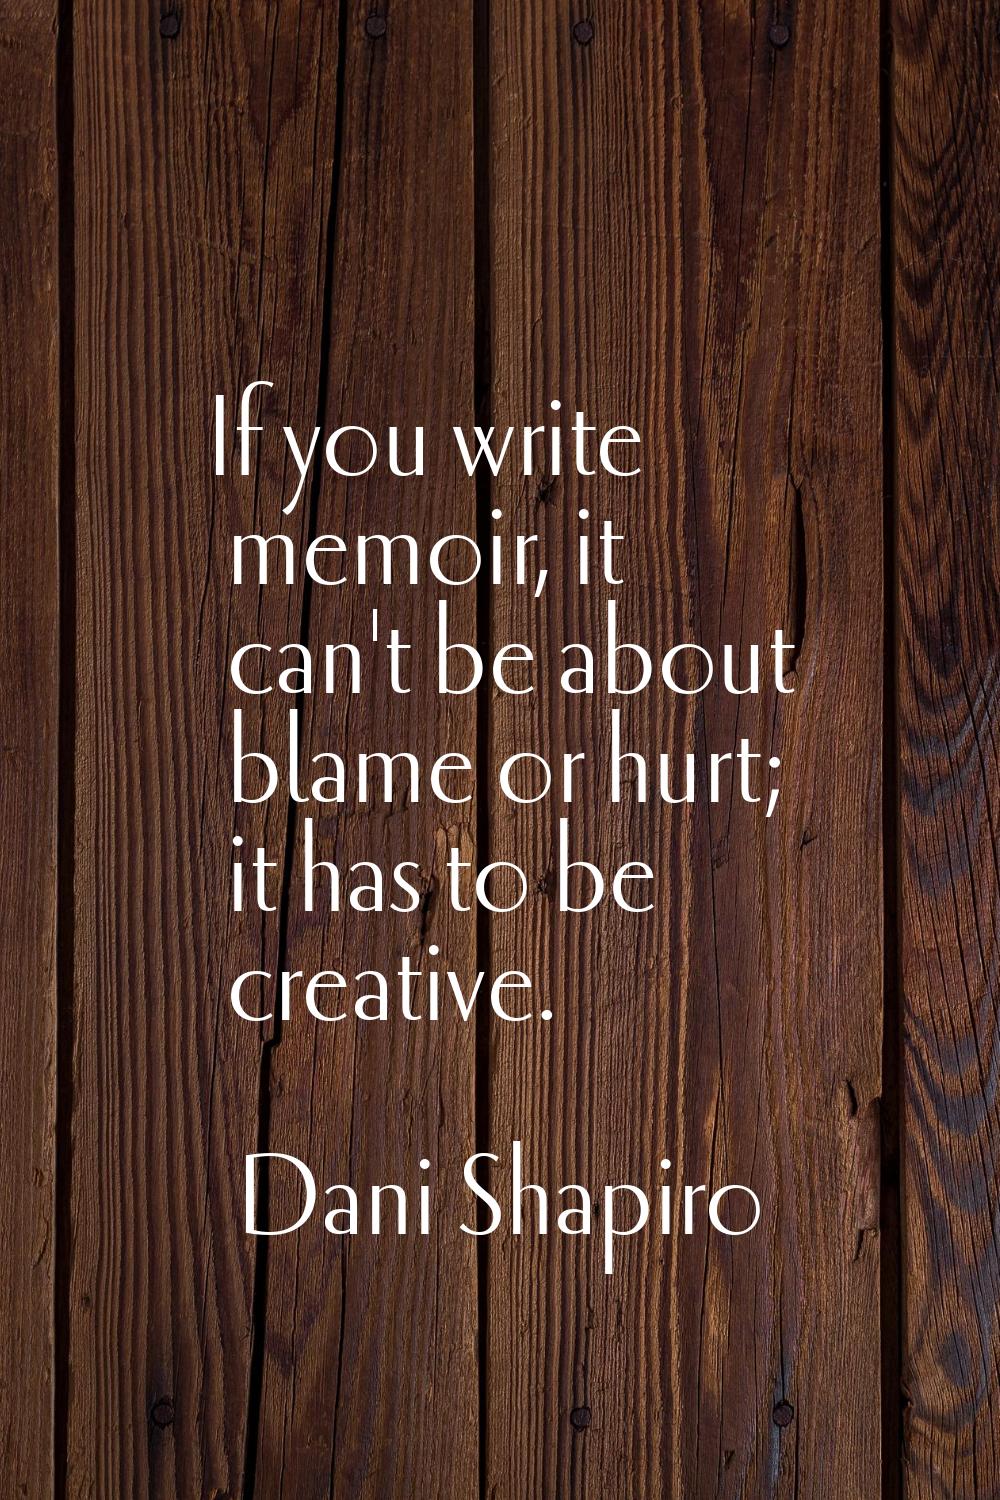 If you write memoir, it can't be about blame or hurt; it has to be creative.